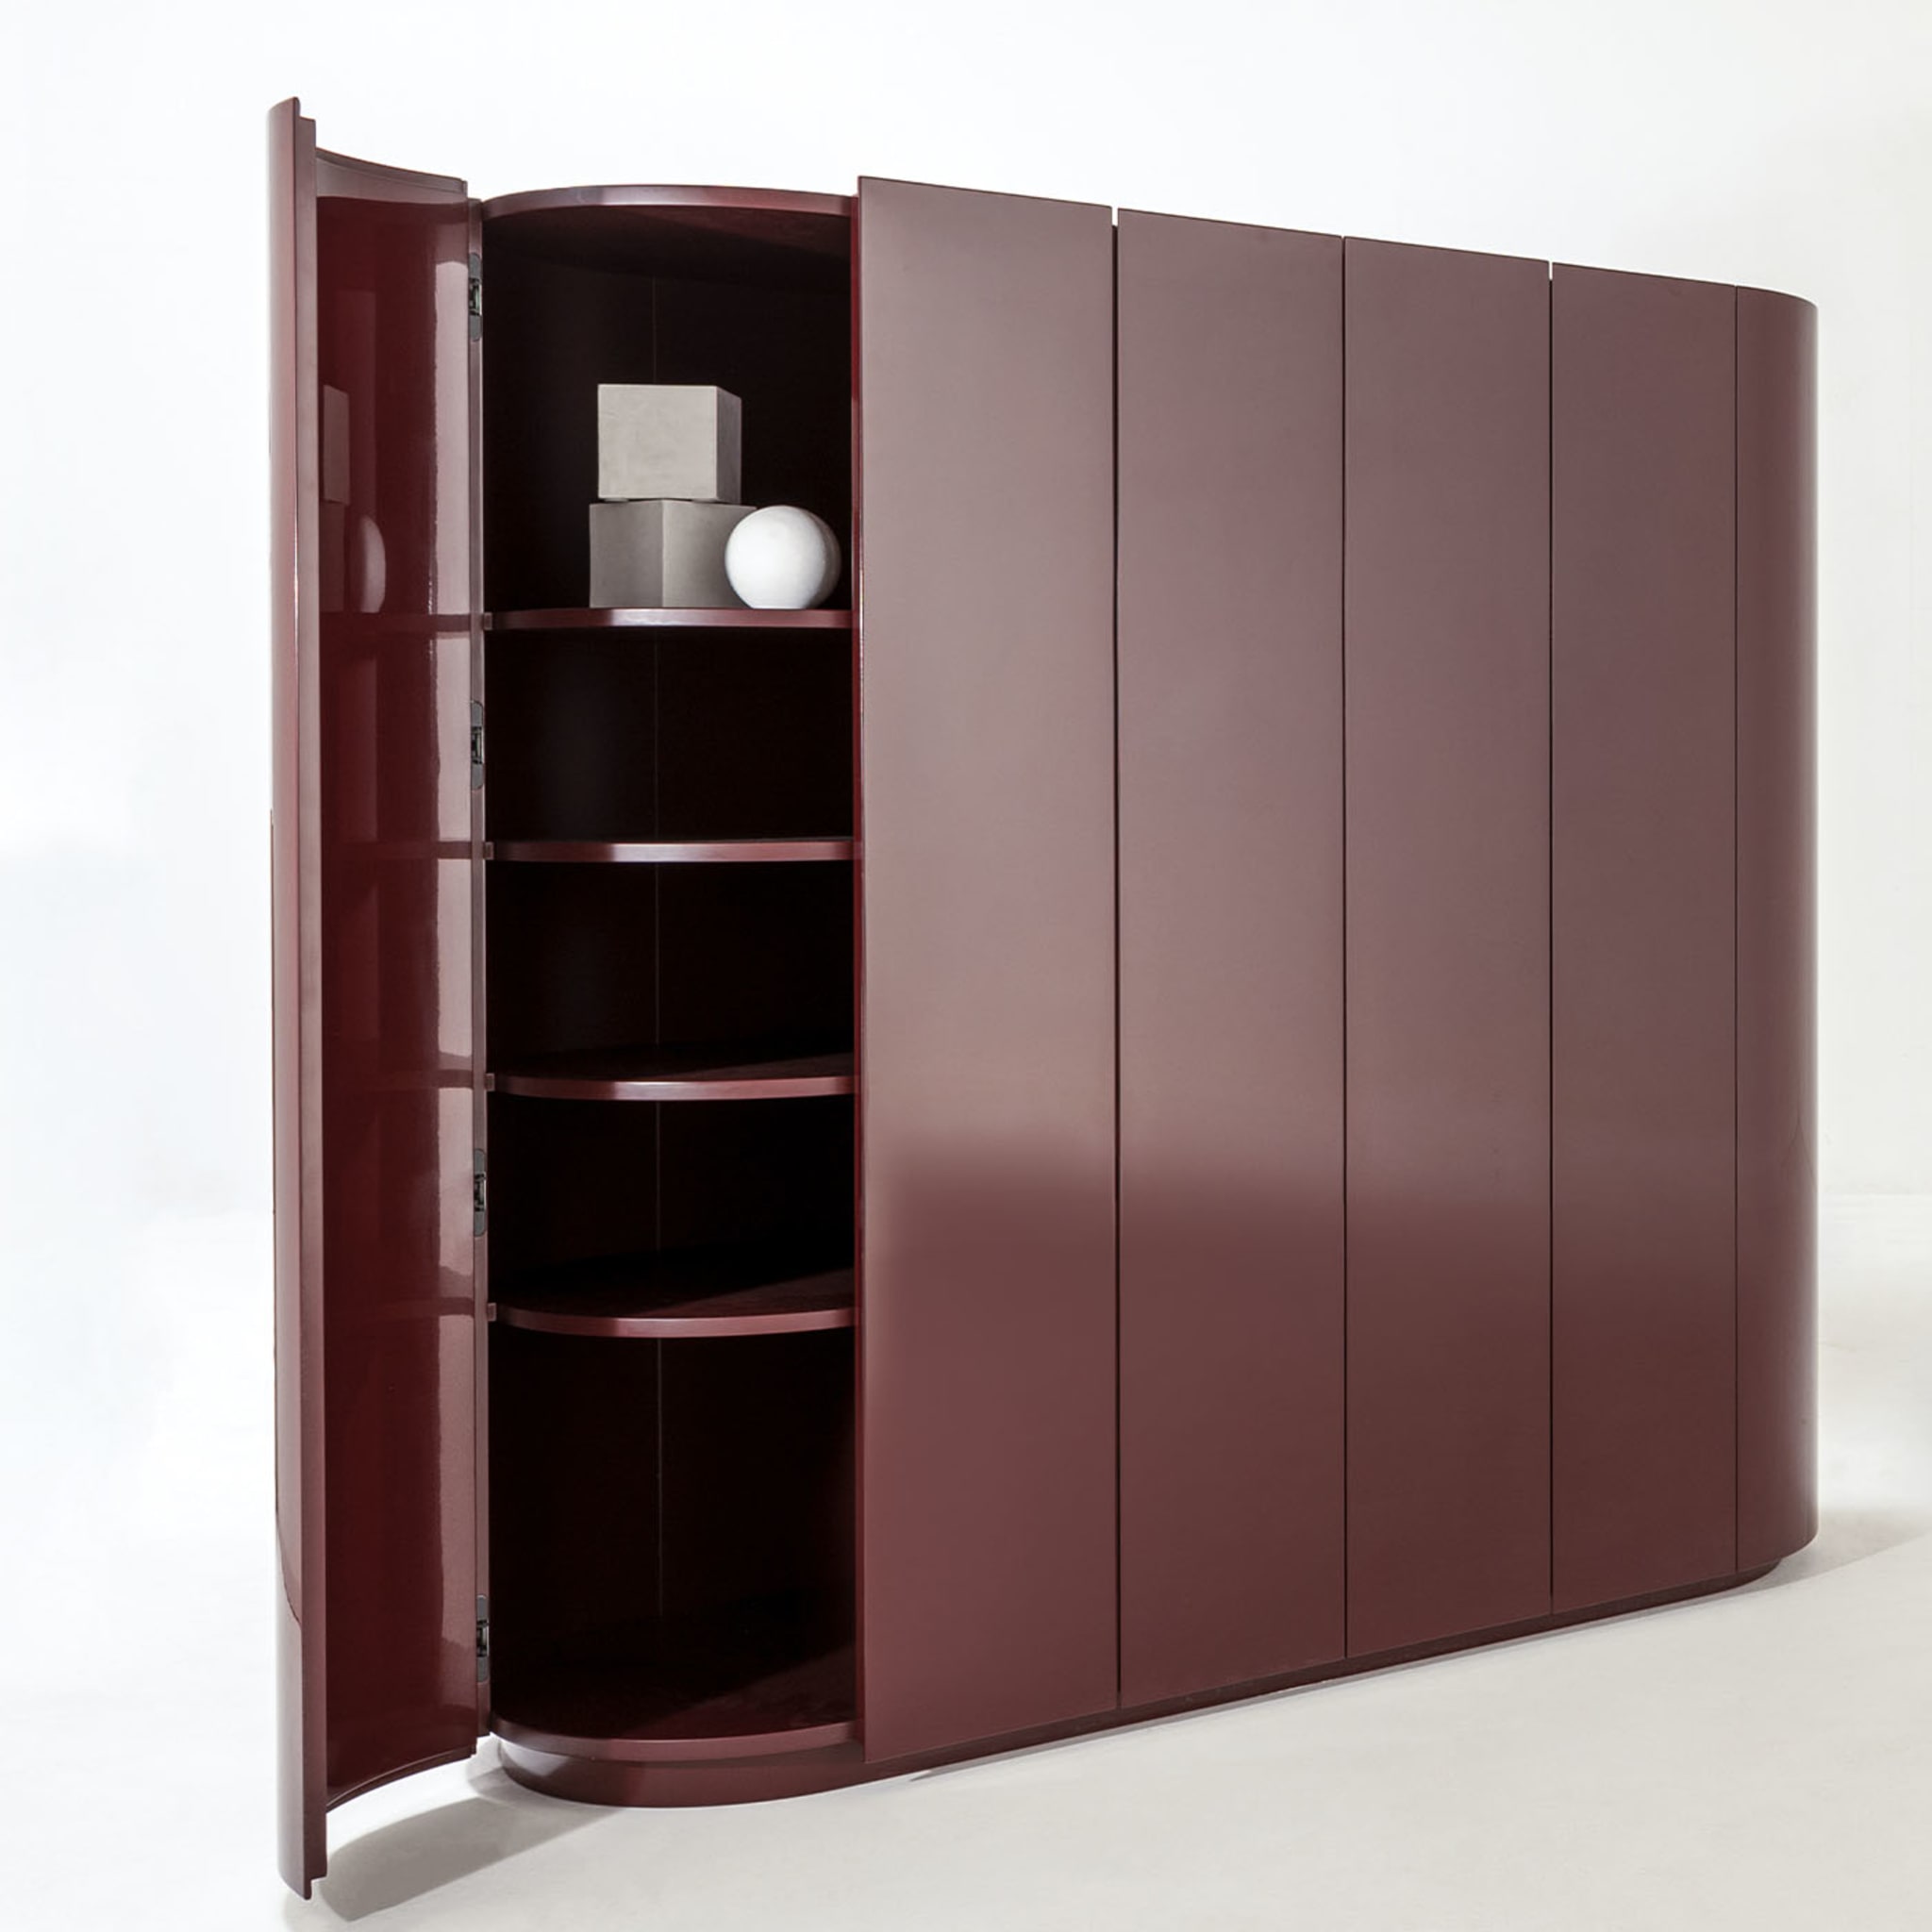 6-Door Medium Glossy Red-Lacquered Cabinet - Alternative view 2